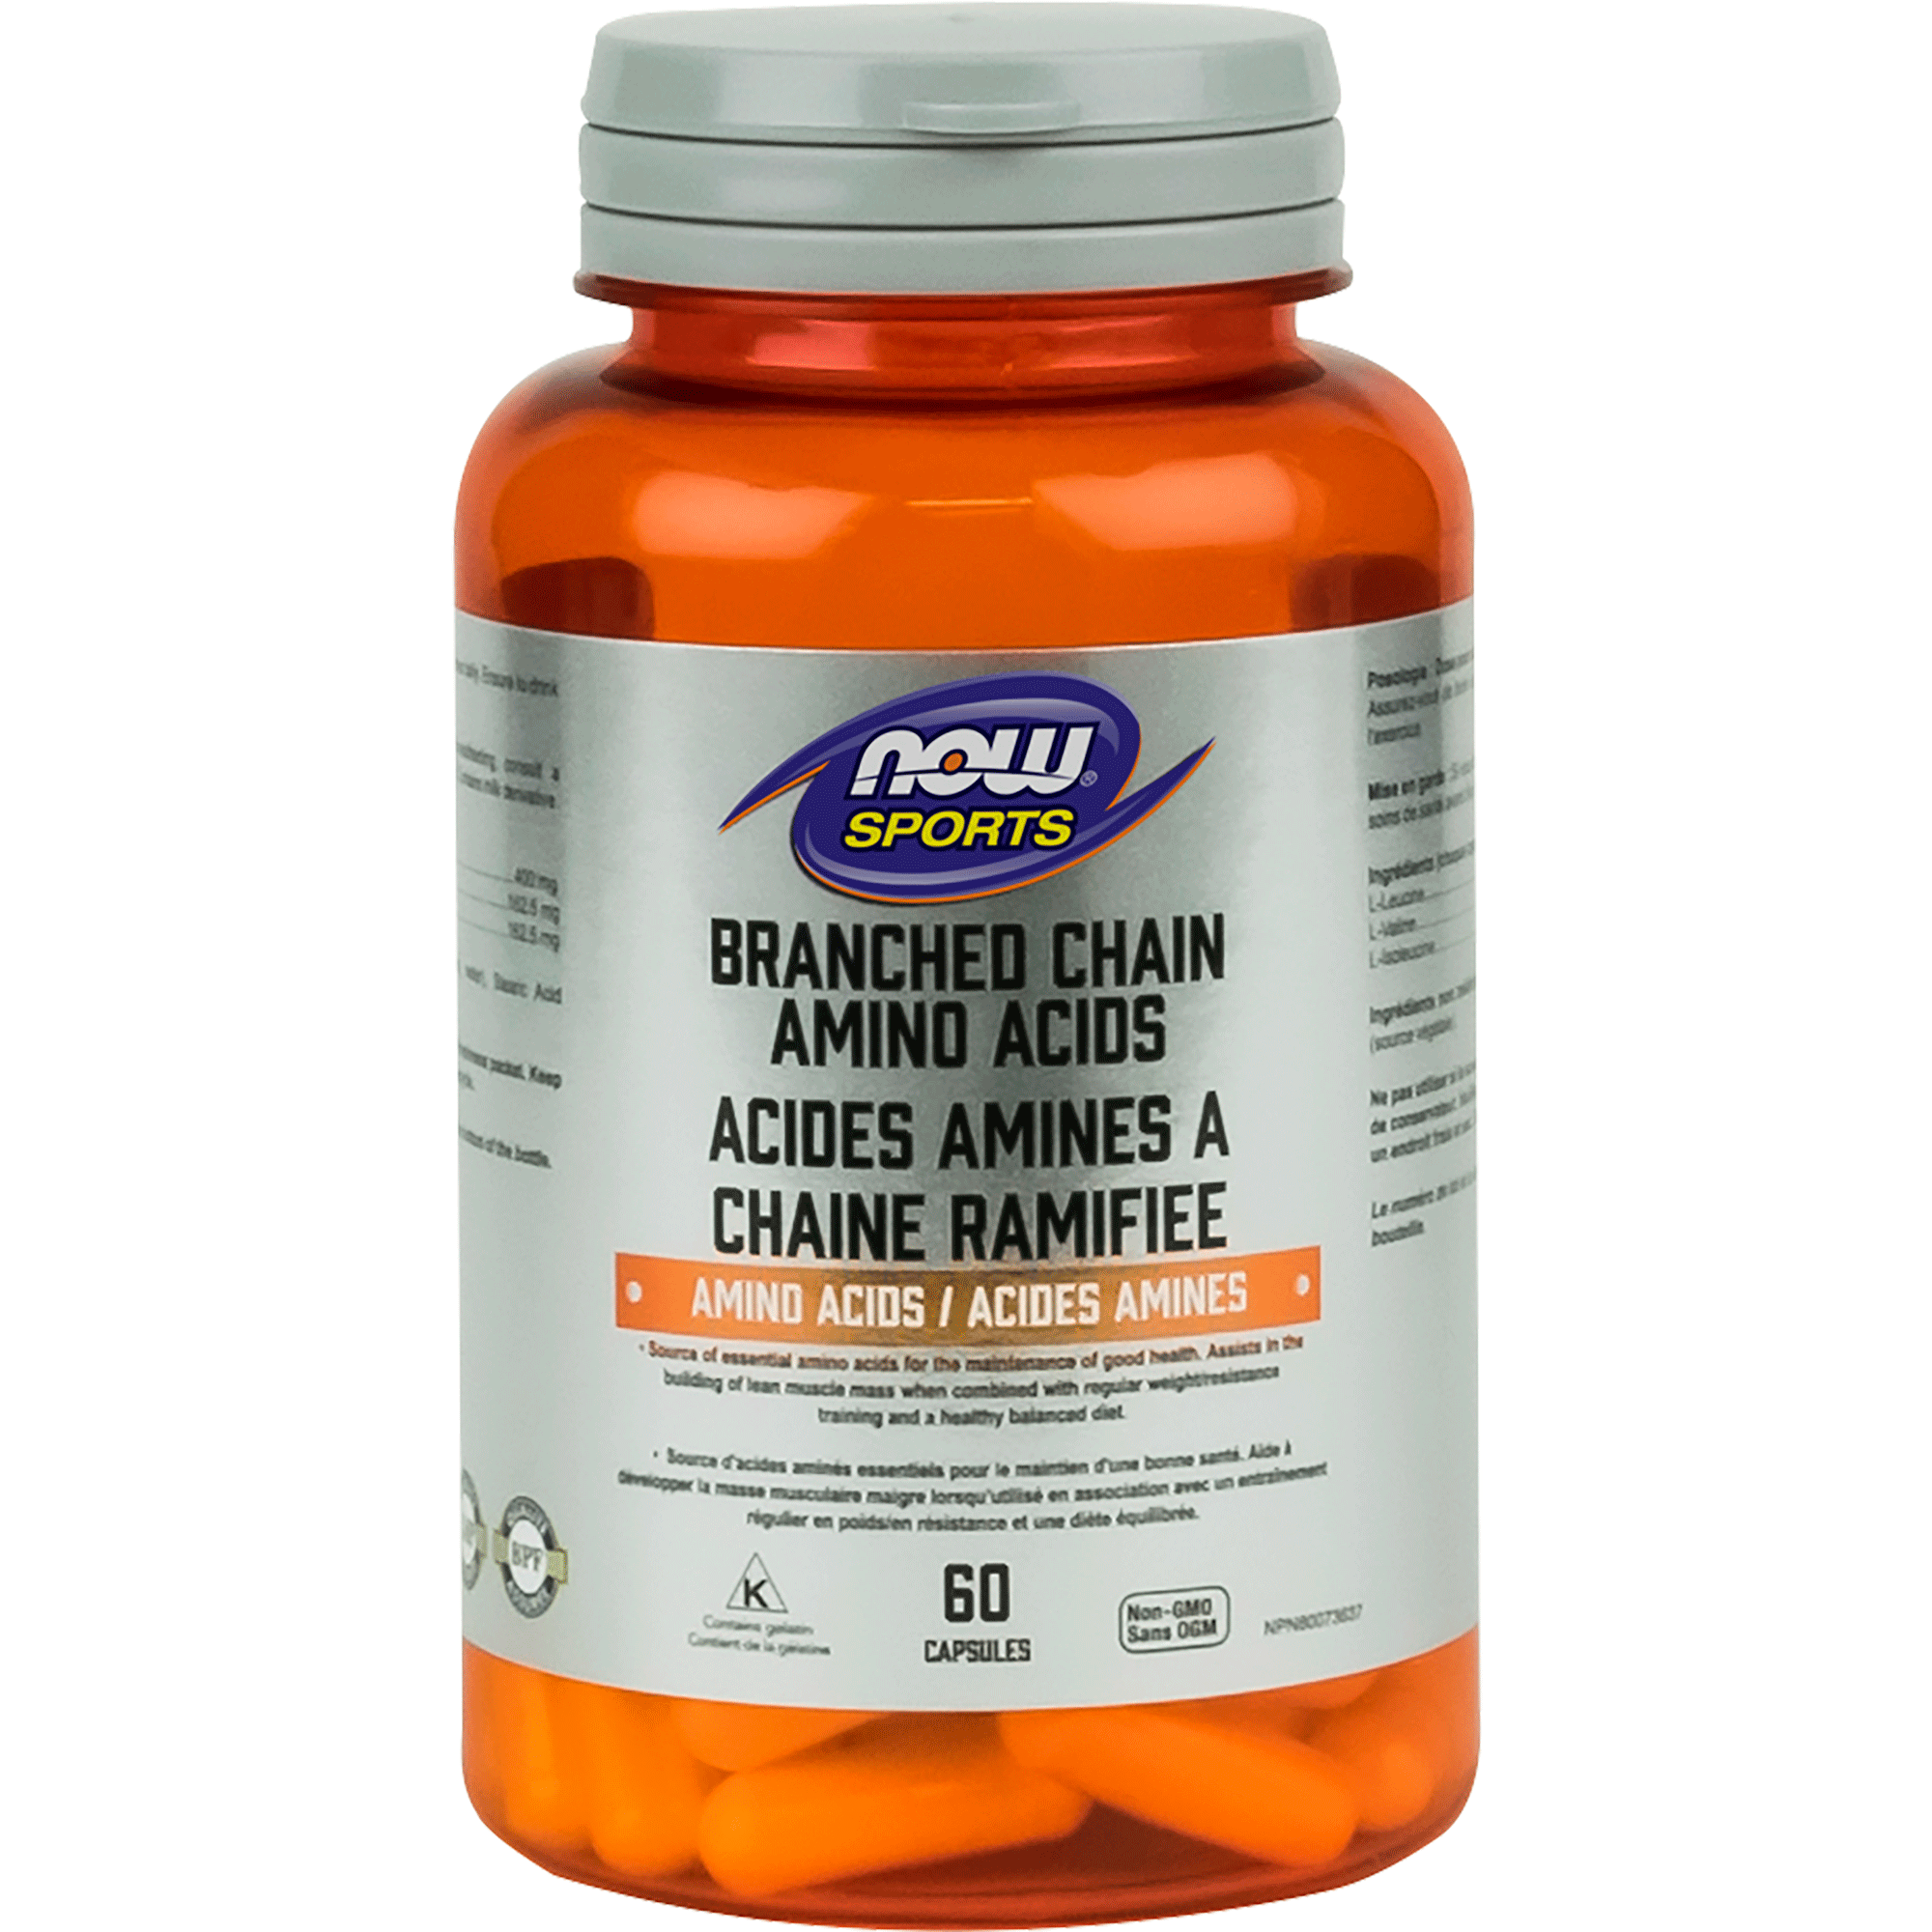 Branched Chain Amino acids. Now Branched Chain Amino acids. Branched Chain Amino acids Now 120 Tab. Amino acid foods. Now sports multi